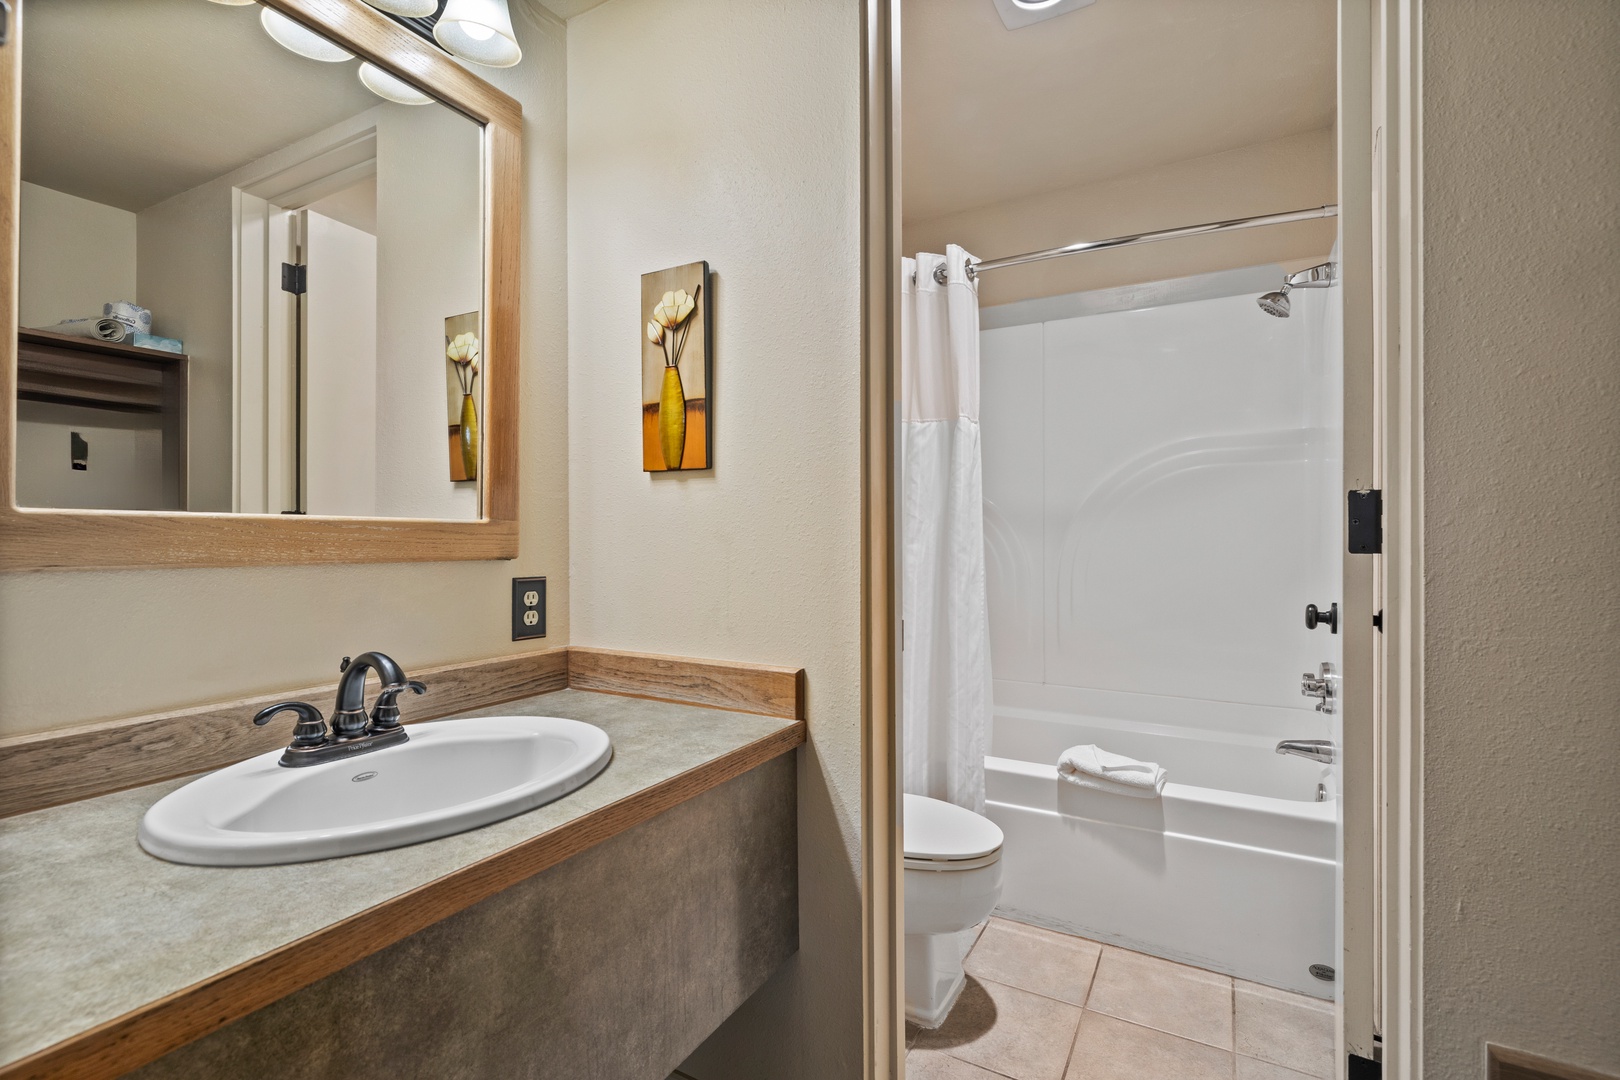 A second full bathroom offers a single vanity & shower/tub combo